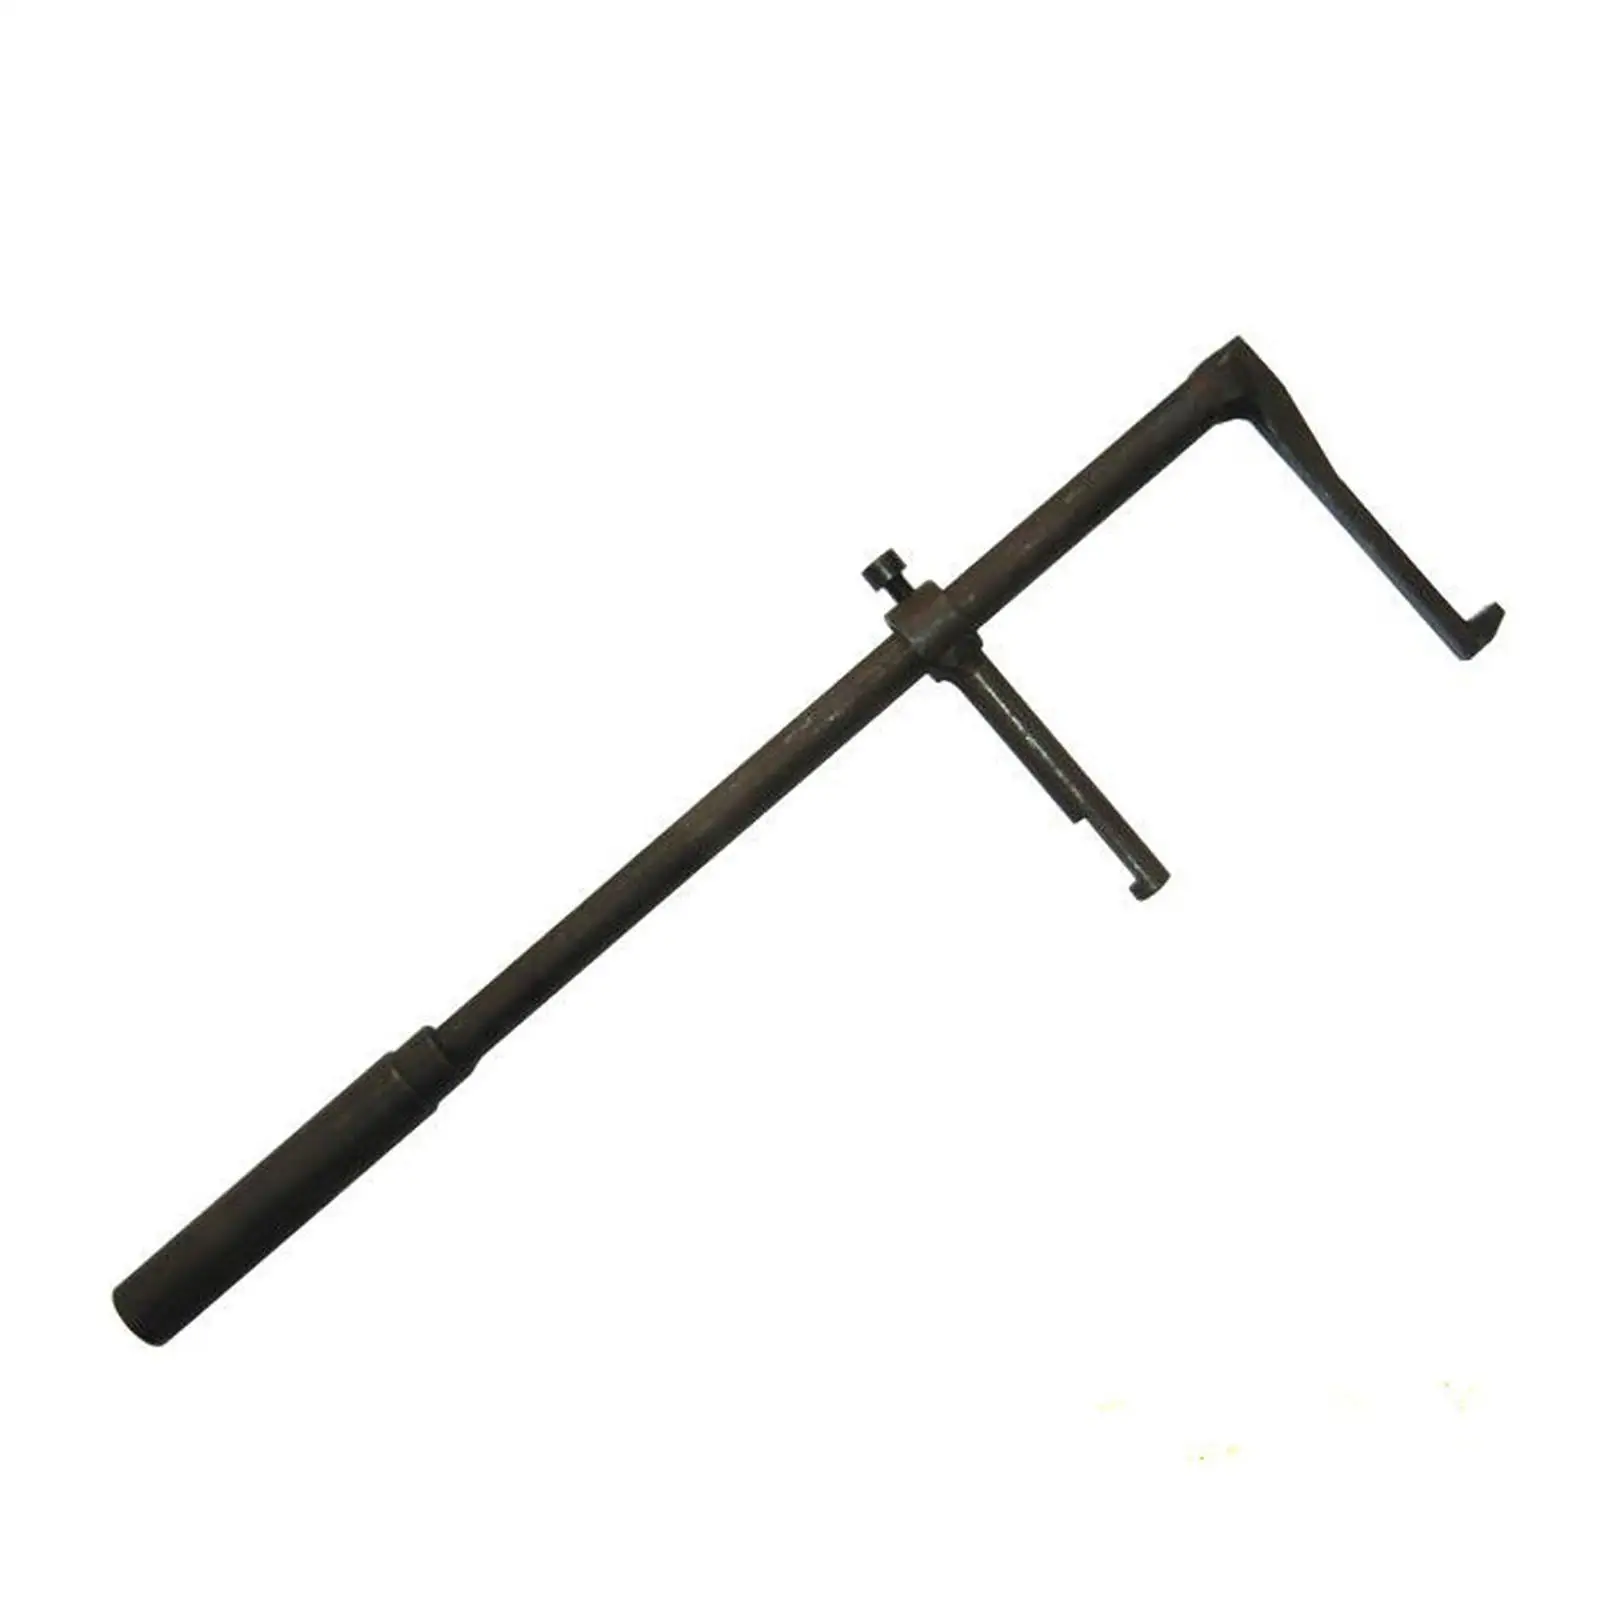 Front Fork Oil Seal Puller Remover Install Tool for Motorcycle Motorbike Durable